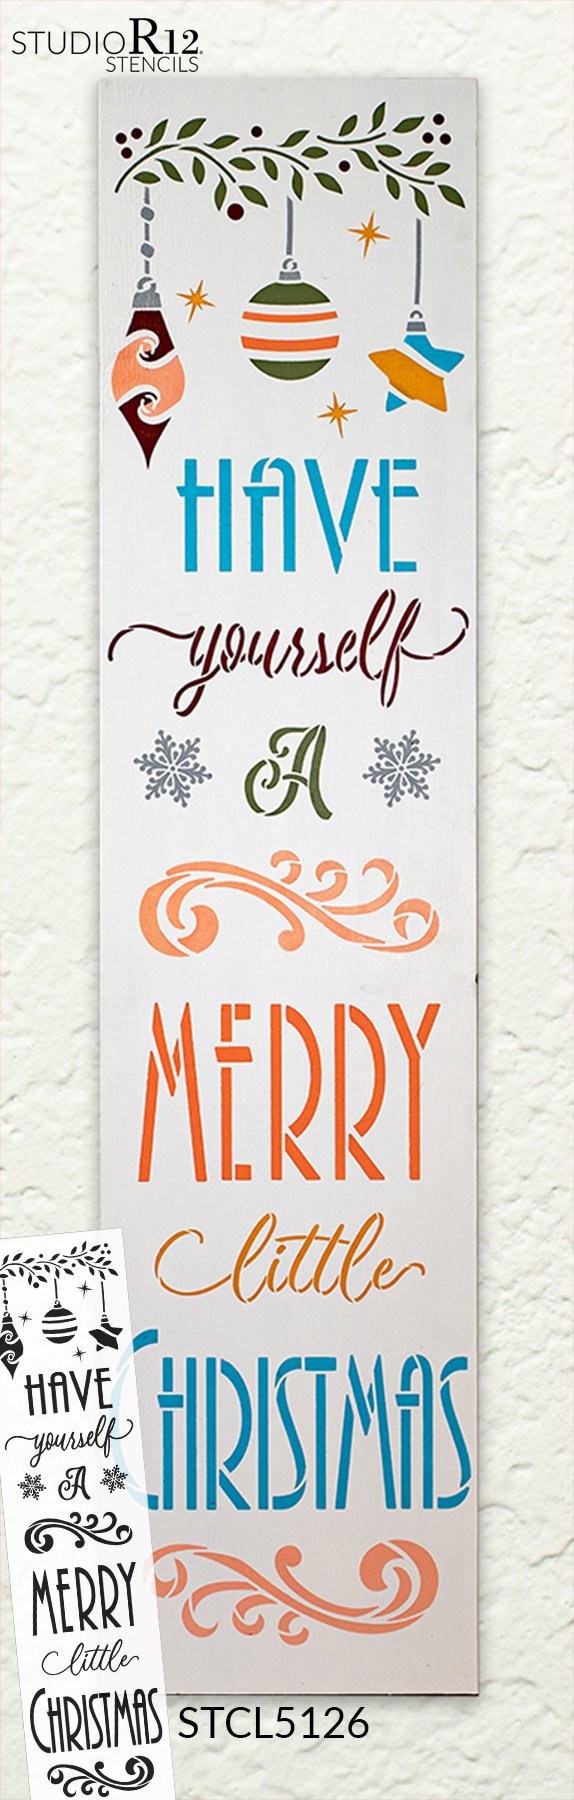 Have Yourself Merry Little Christmas 2-Part Stencil by StudioR12 | DIY Home Decor Gift | Craft & Paint Wood Sign Reusable Mylar Template | 4 foot | STCL5126